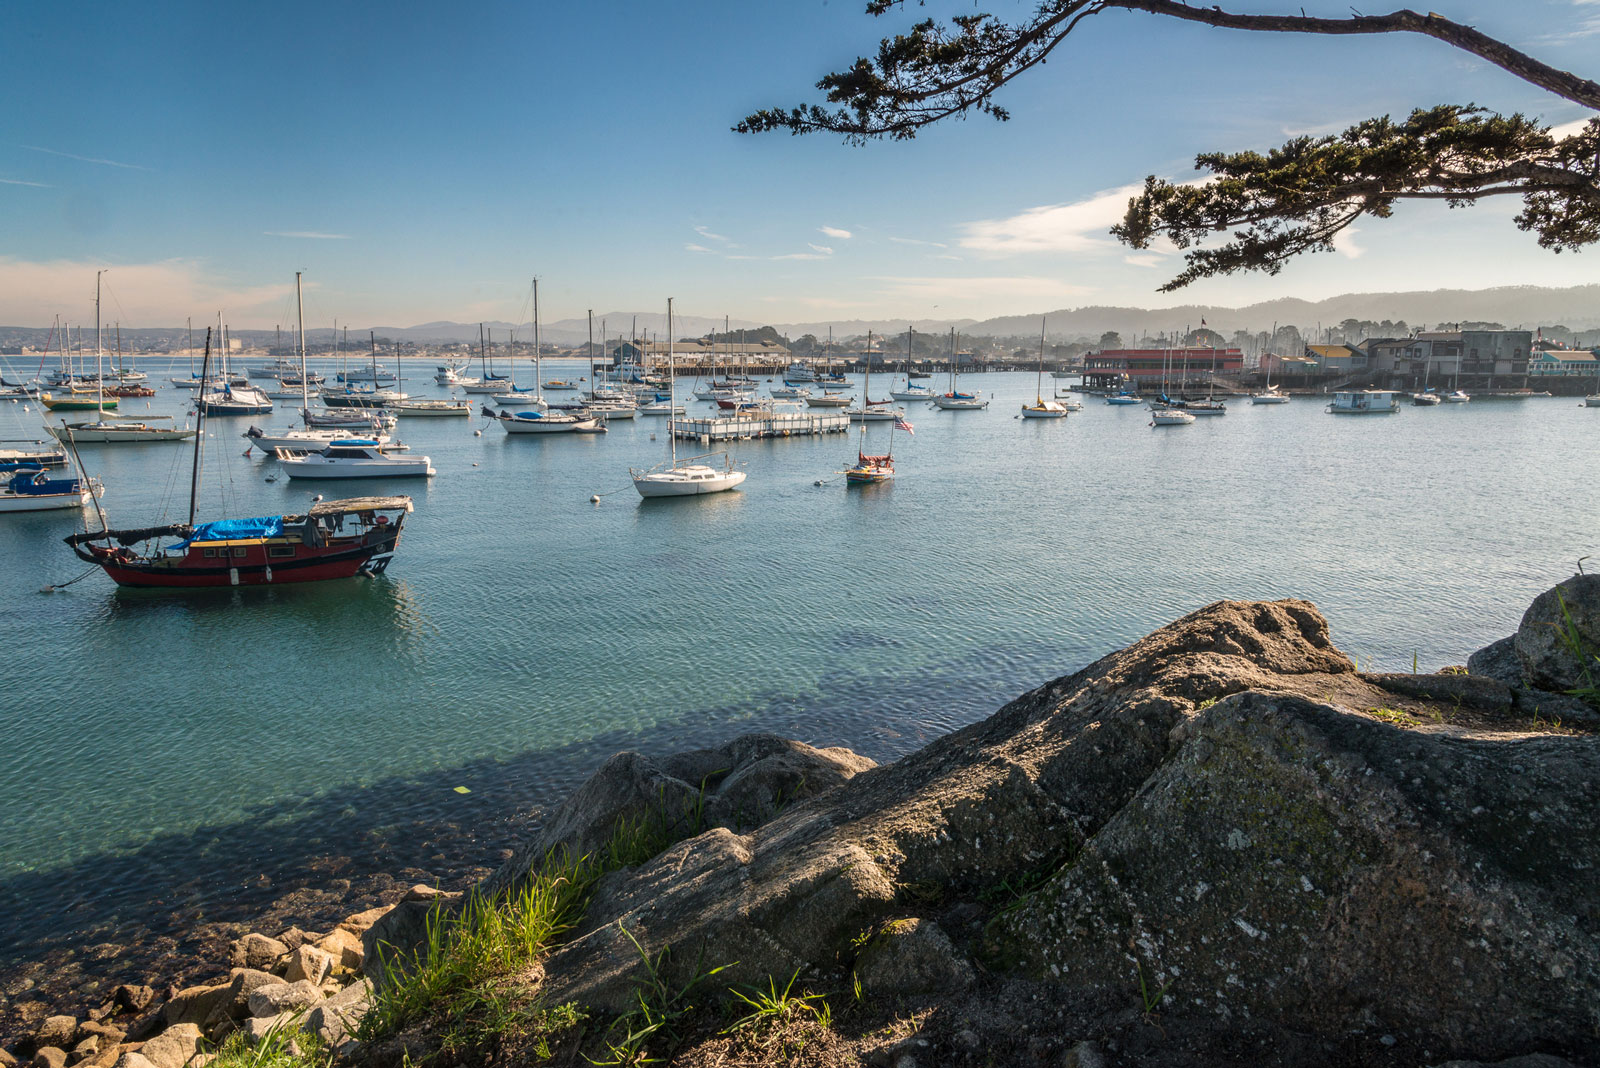 Landscape View Of Monterey Bay Filled With Boats In The Distance, WTJ Law